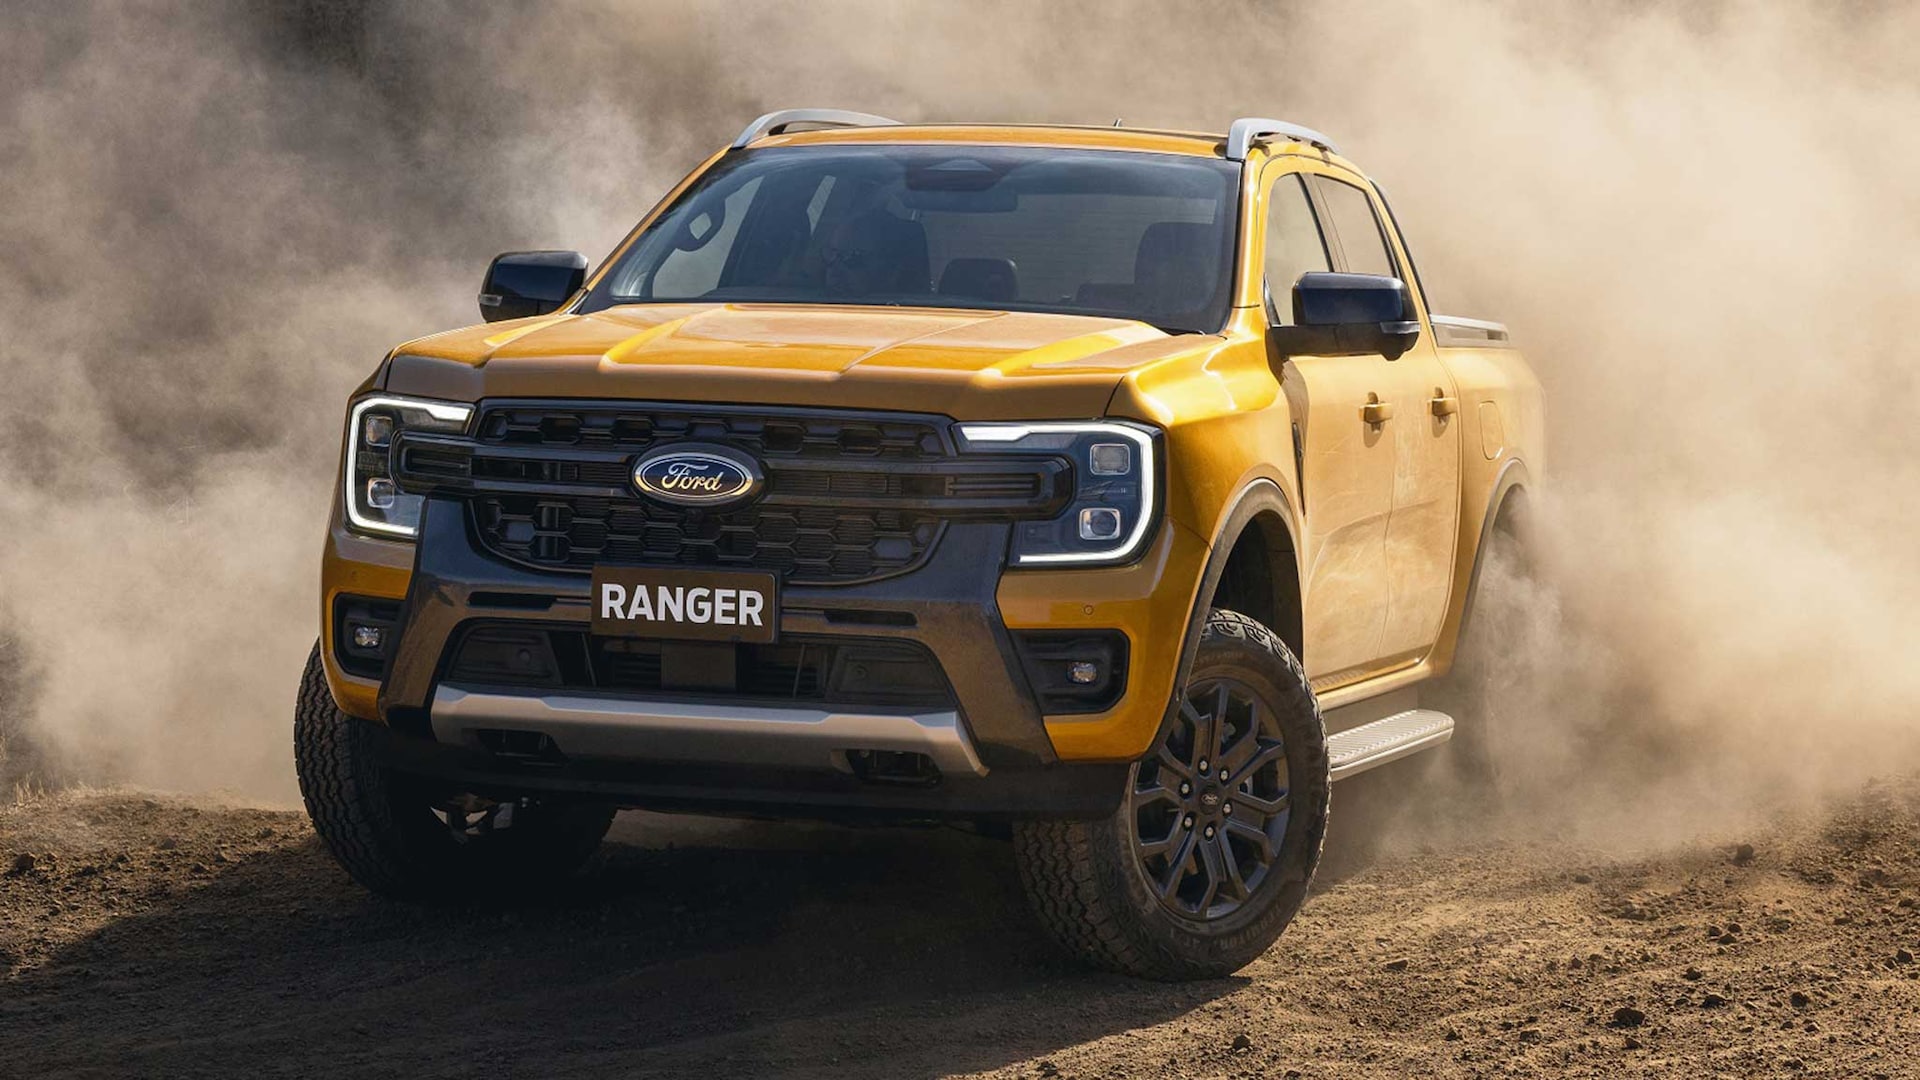 2023 Ford Ranger Buyer's Guide: Reviews, Specs, Comparisons